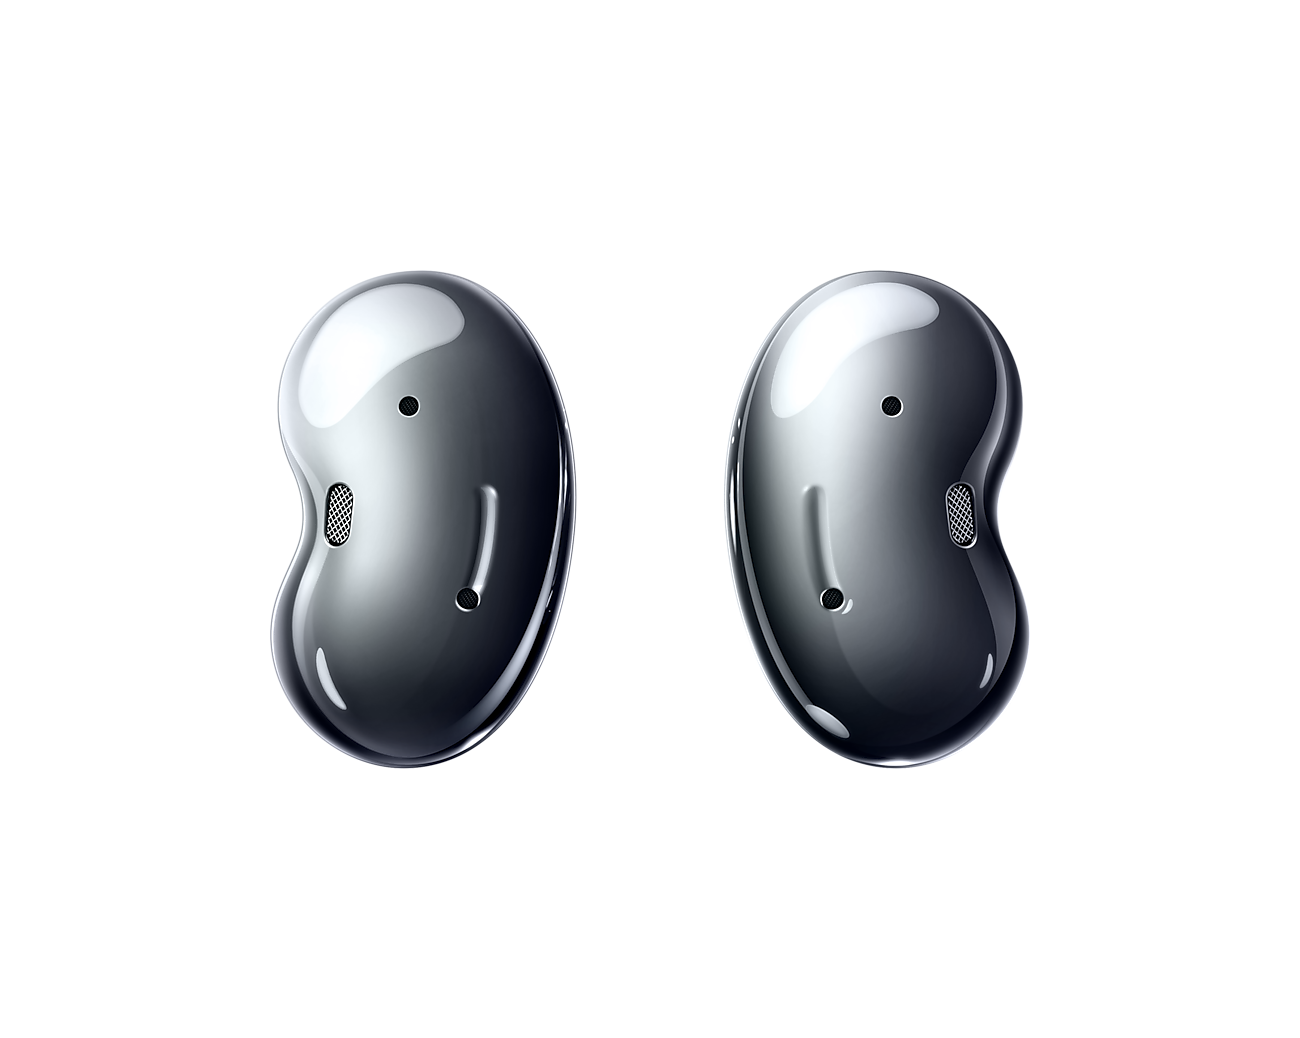 Samsung Galaxy Buds Live In-Ear Noise Cancelling Headphones